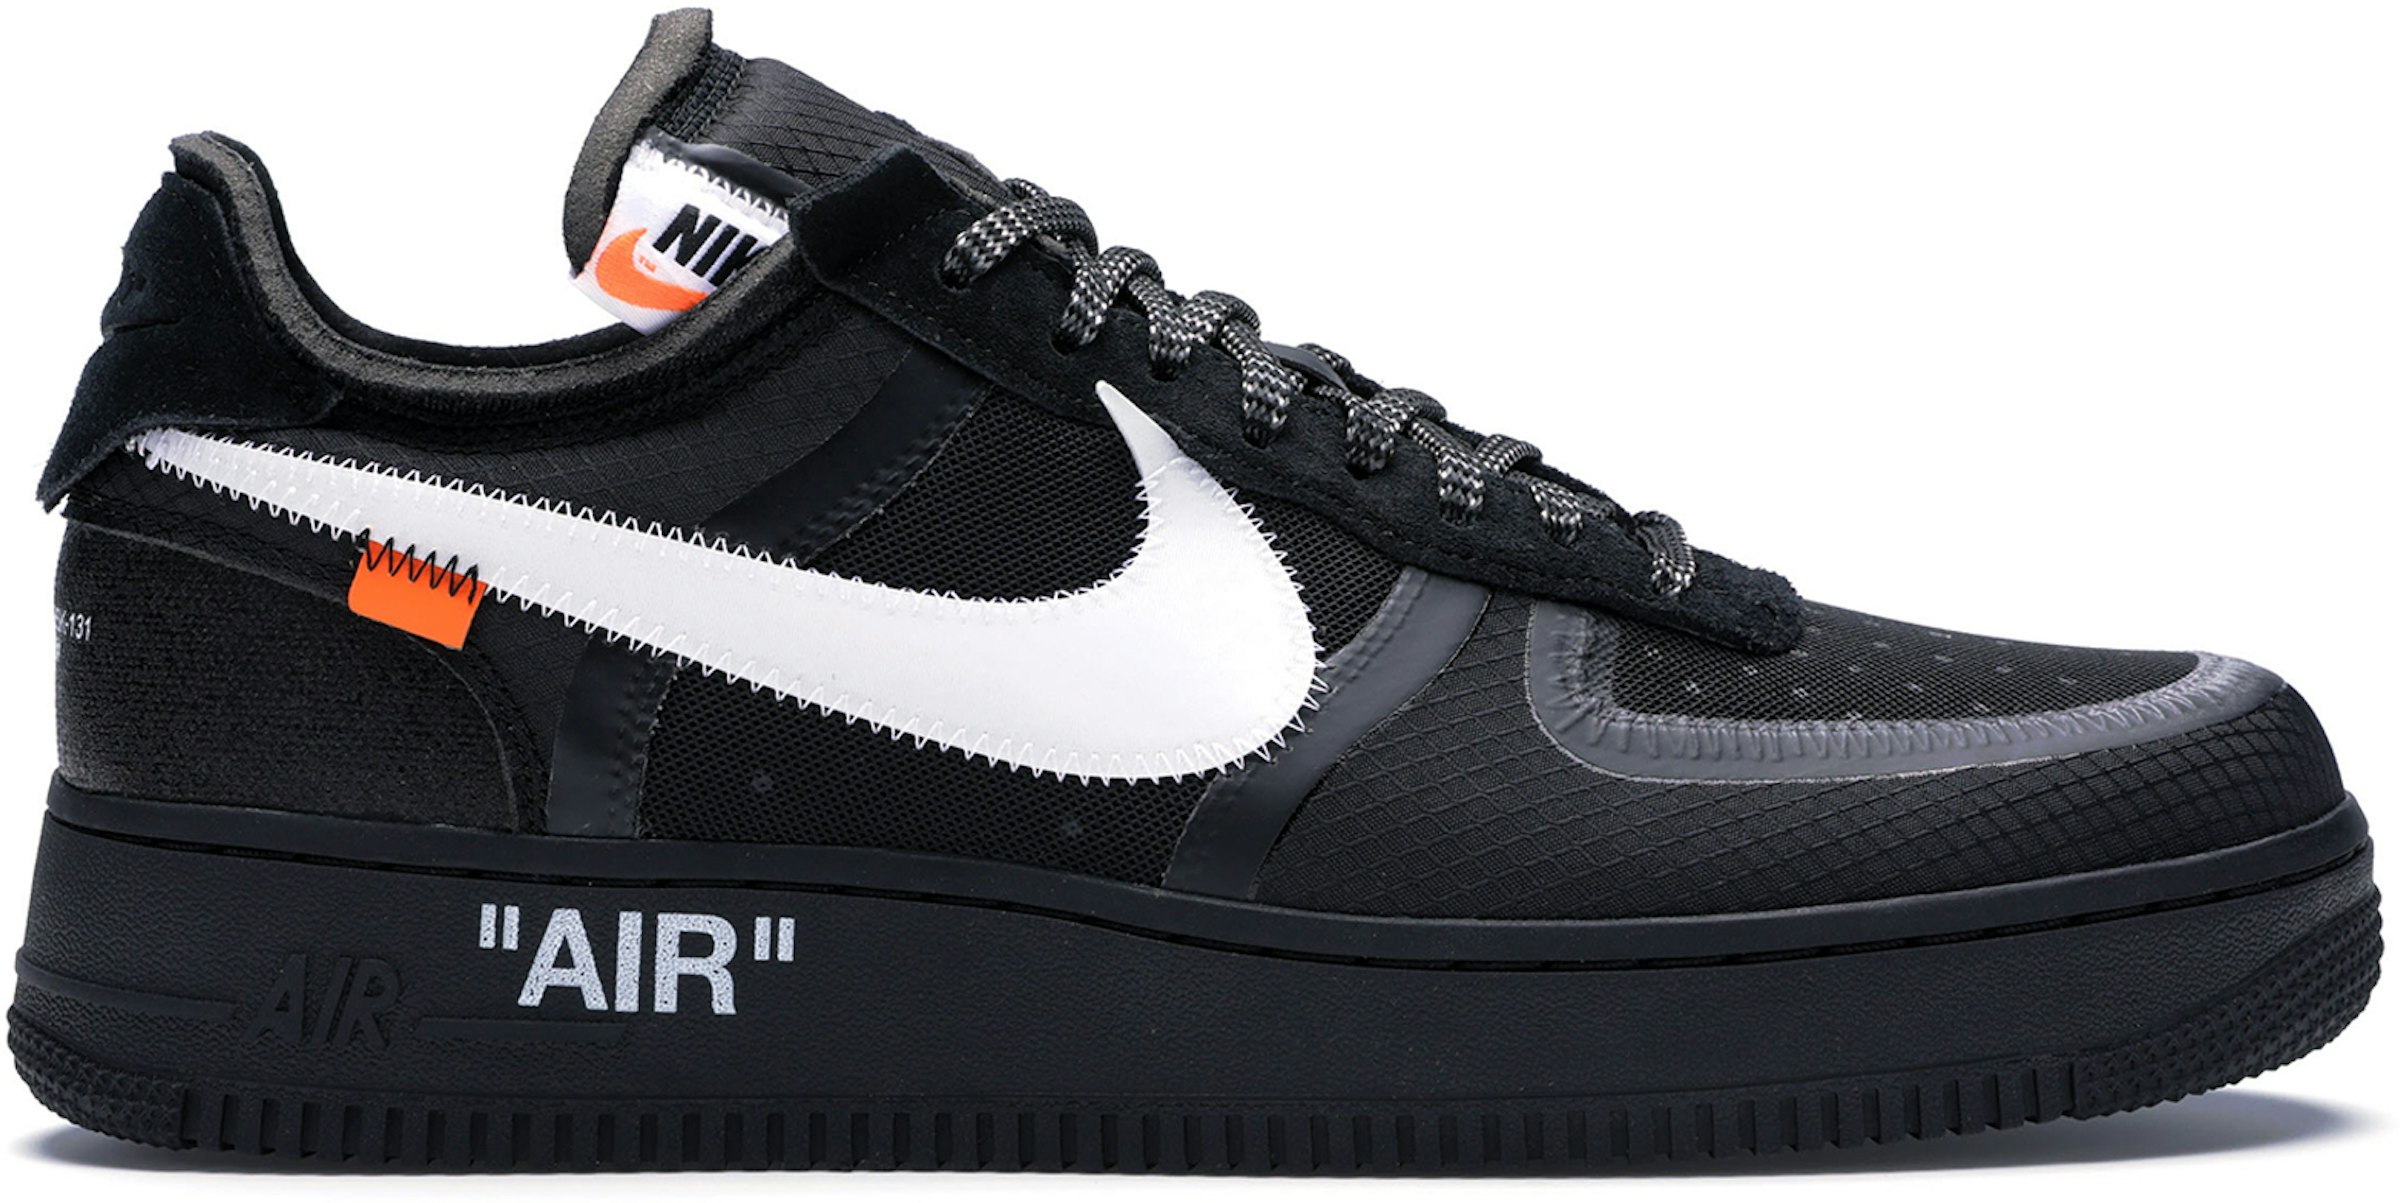 Air Force 1 Low Off-White Black - AO4606-001 - US